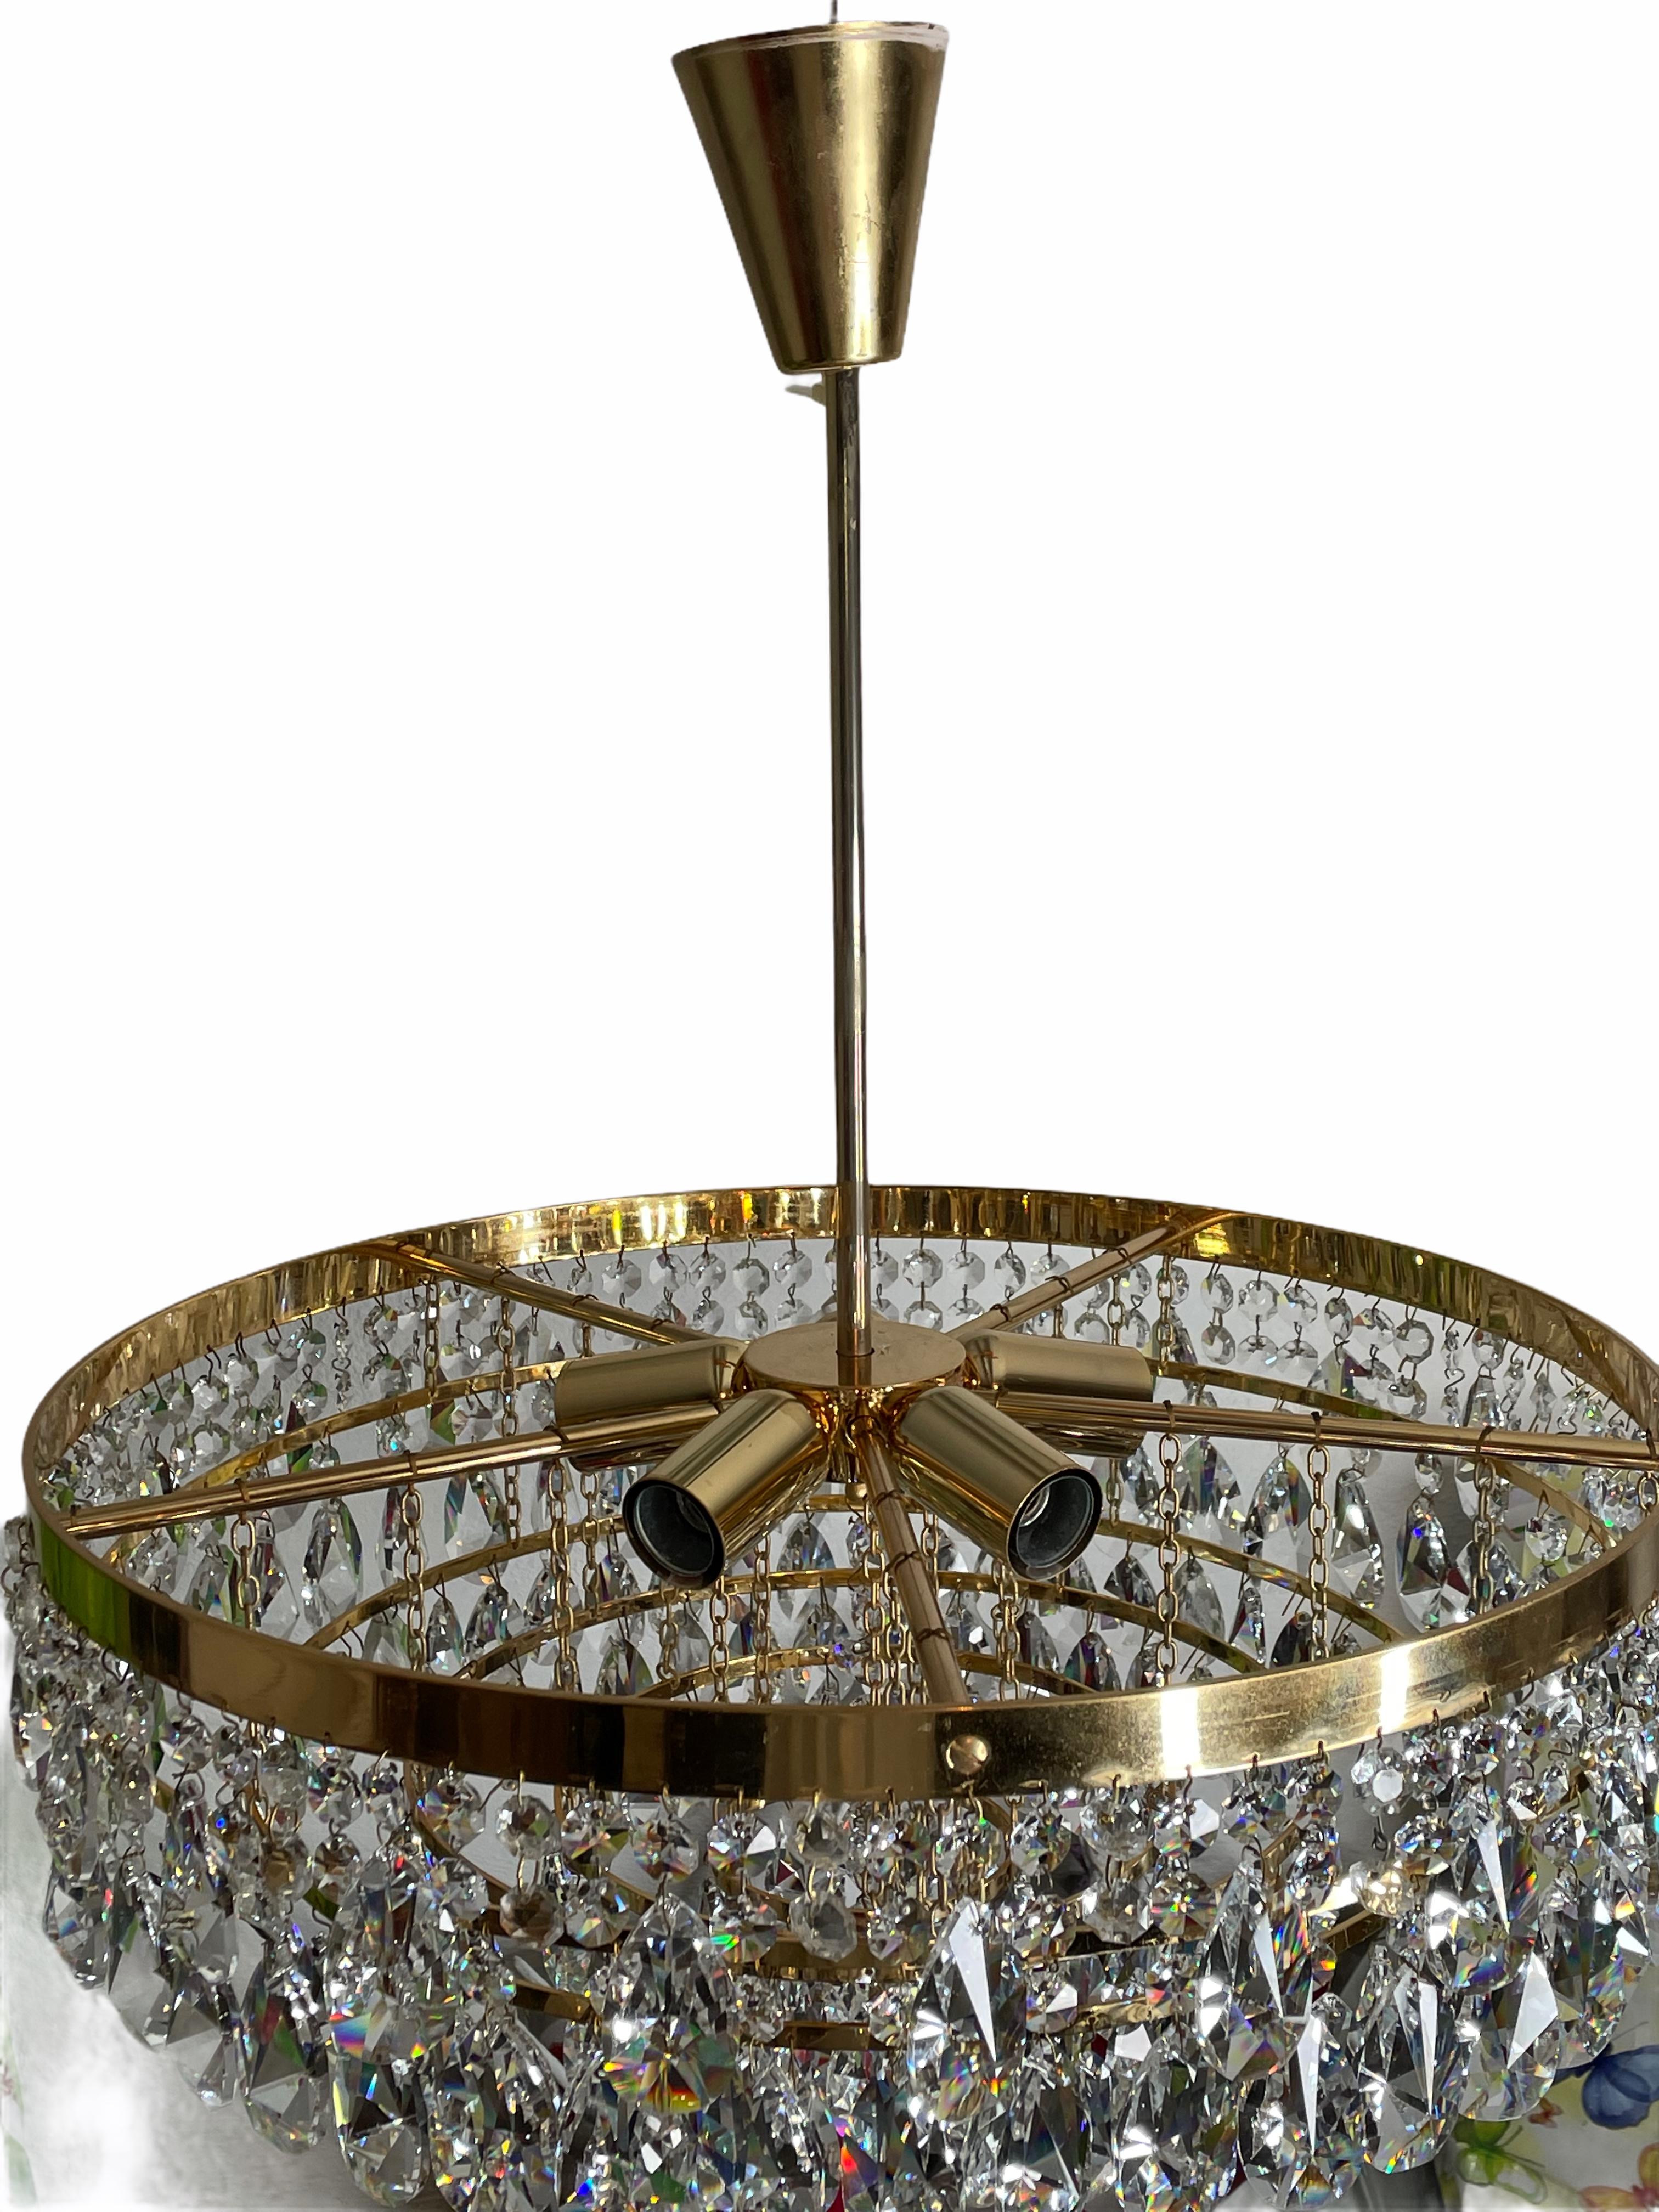 A beautiful 6-tiered brass and crystal glass chandelier made by Palwa Leuchten, Germany, 1960s. The chandelier requires six European E14 candelabra bulbs, each up to 40 watts. It is made of cut crystals and a gold-plated brass frame.
This will look